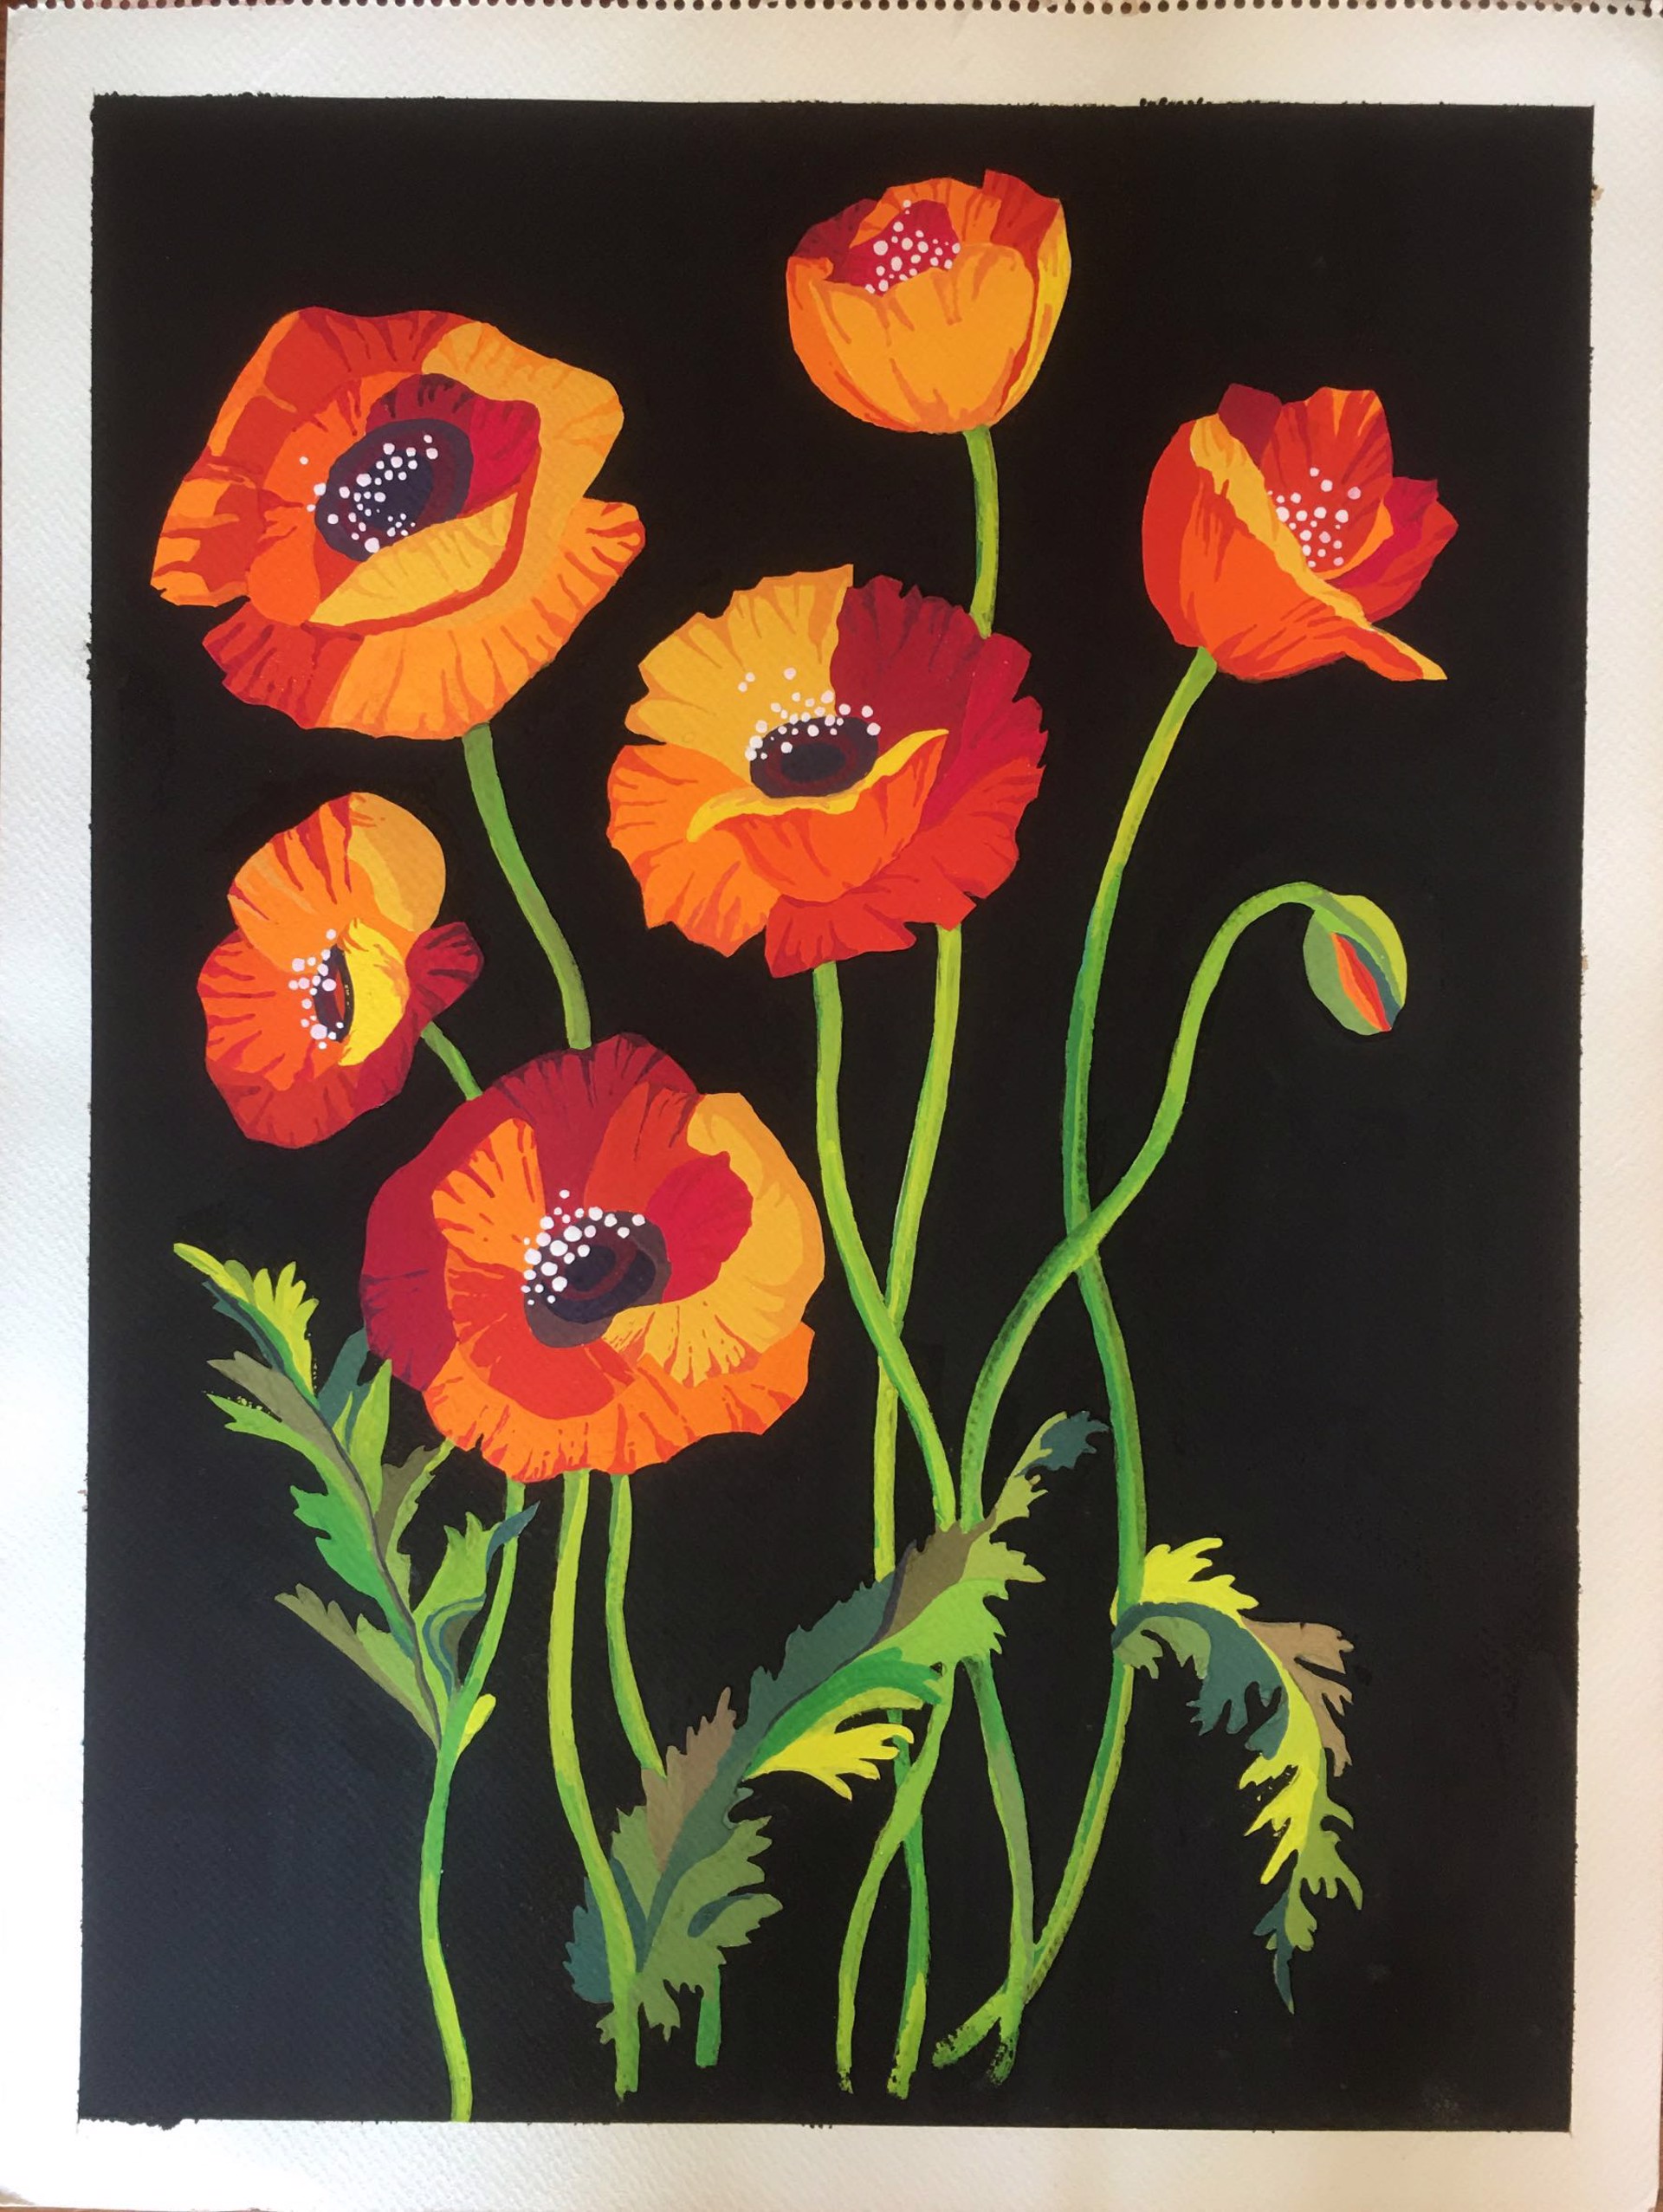 Poppies by Rahat Mama